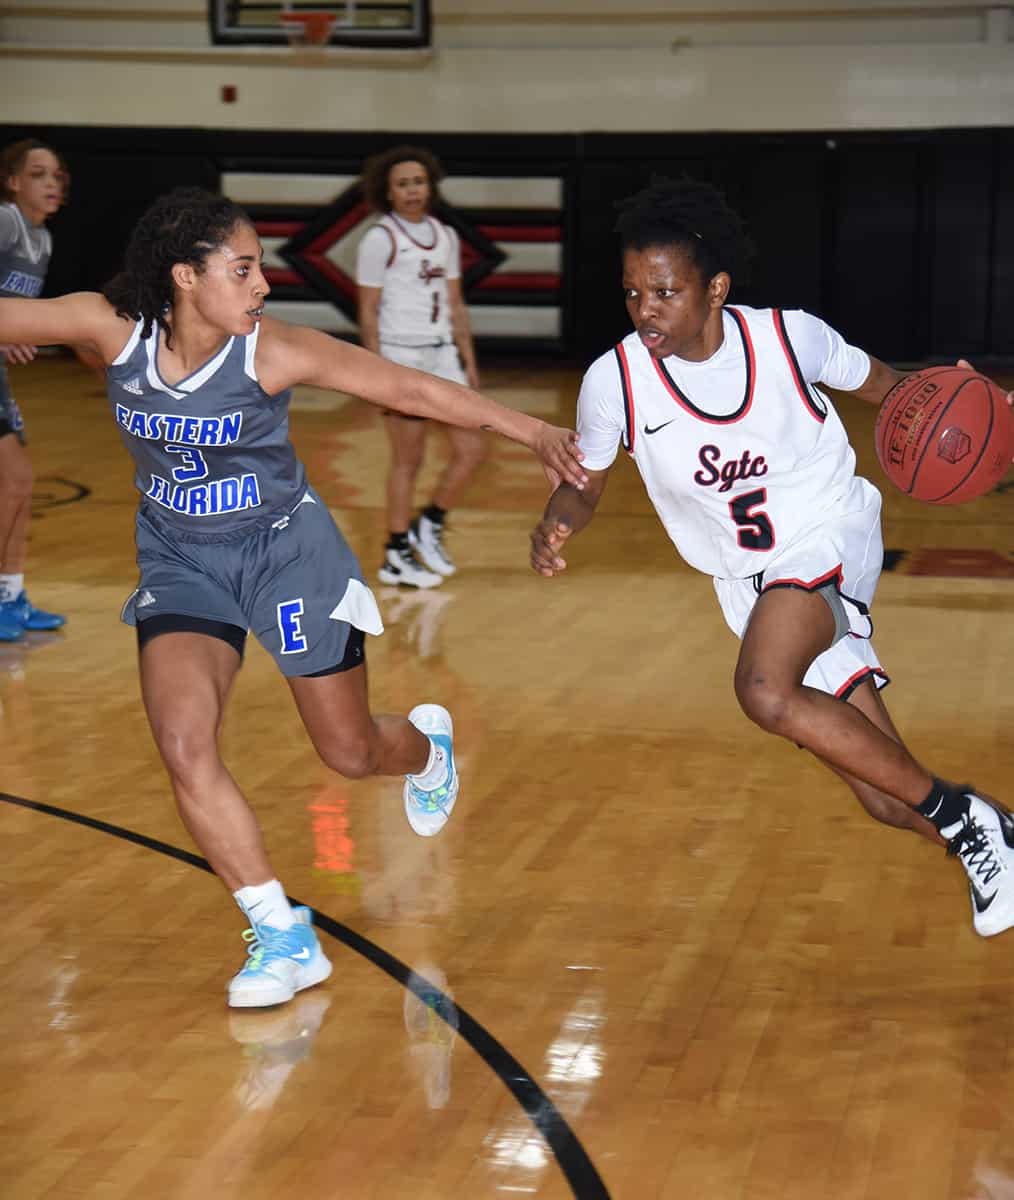 Amara Edeh, 5, is shown above driving to the basket. She led the Lady Jets in scoring with 15 points in a big win over Eastern Florida State in the Lady Jets Holiday Classic.